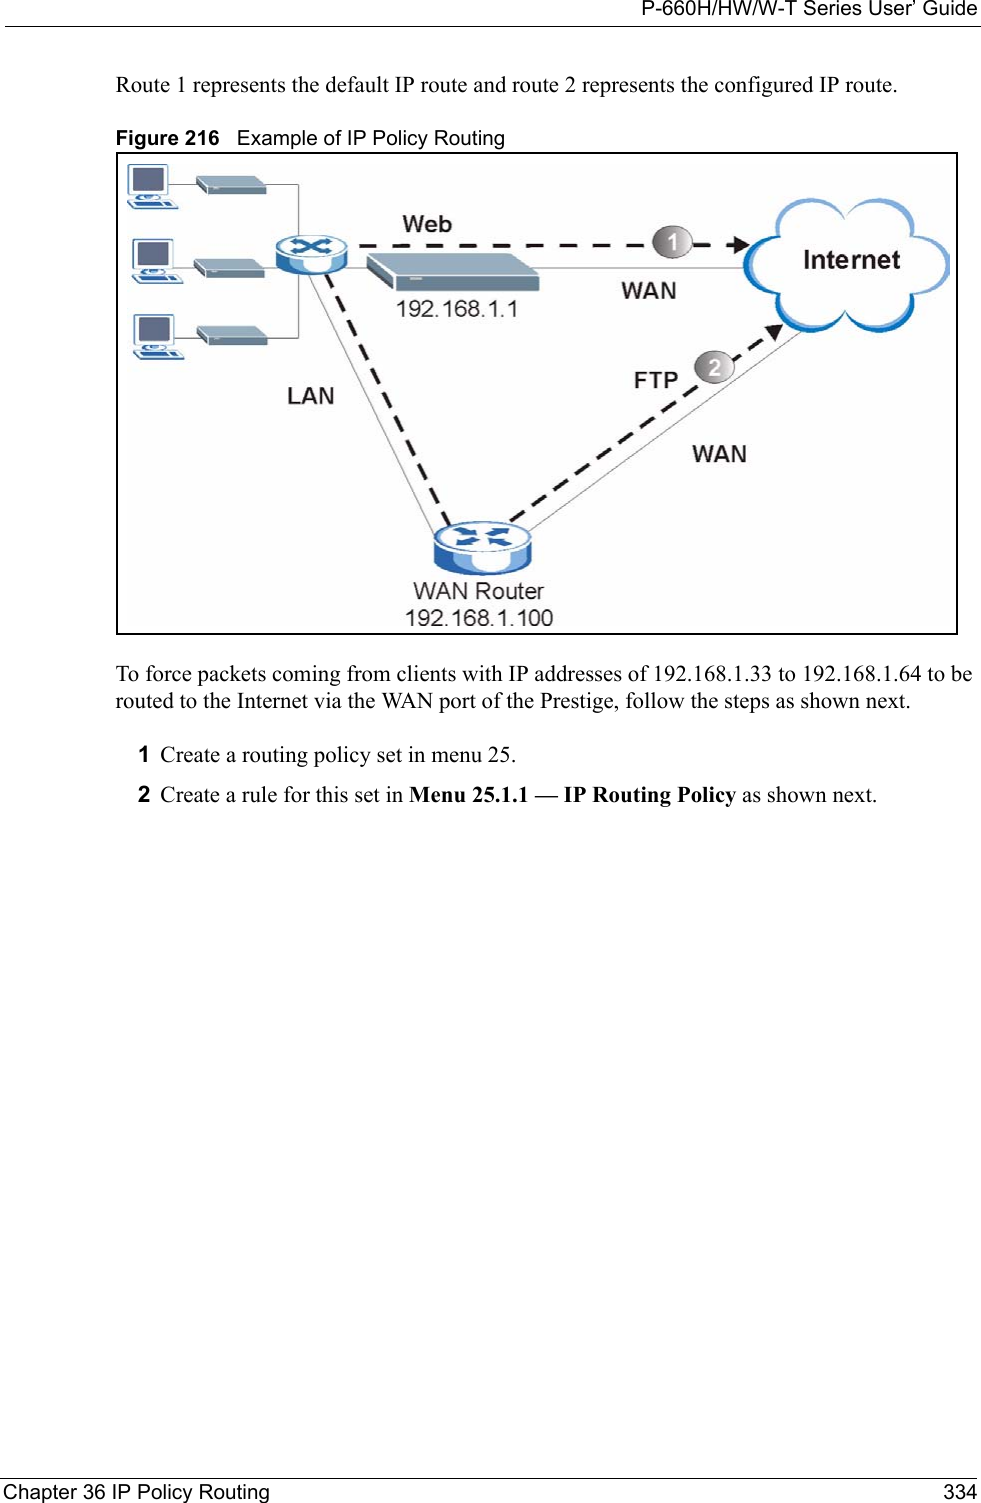 P-660H/HW/W-T Series User’ GuideChapter 36 IP Policy Routing 334Route 1 represents the default IP route and route 2 represents the configured IP route.Figure 216   Example of IP Policy Routing To force packets coming from clients with IP addresses of 192.168.1.33 to 192.168.1.64 to be routed to the Internet via the WAN port of the Prestige, follow the steps as shown next.1Create a routing policy set in menu 25.2Create a rule for this set in Menu 25.1.1 — IP Routing Policy as shown next.